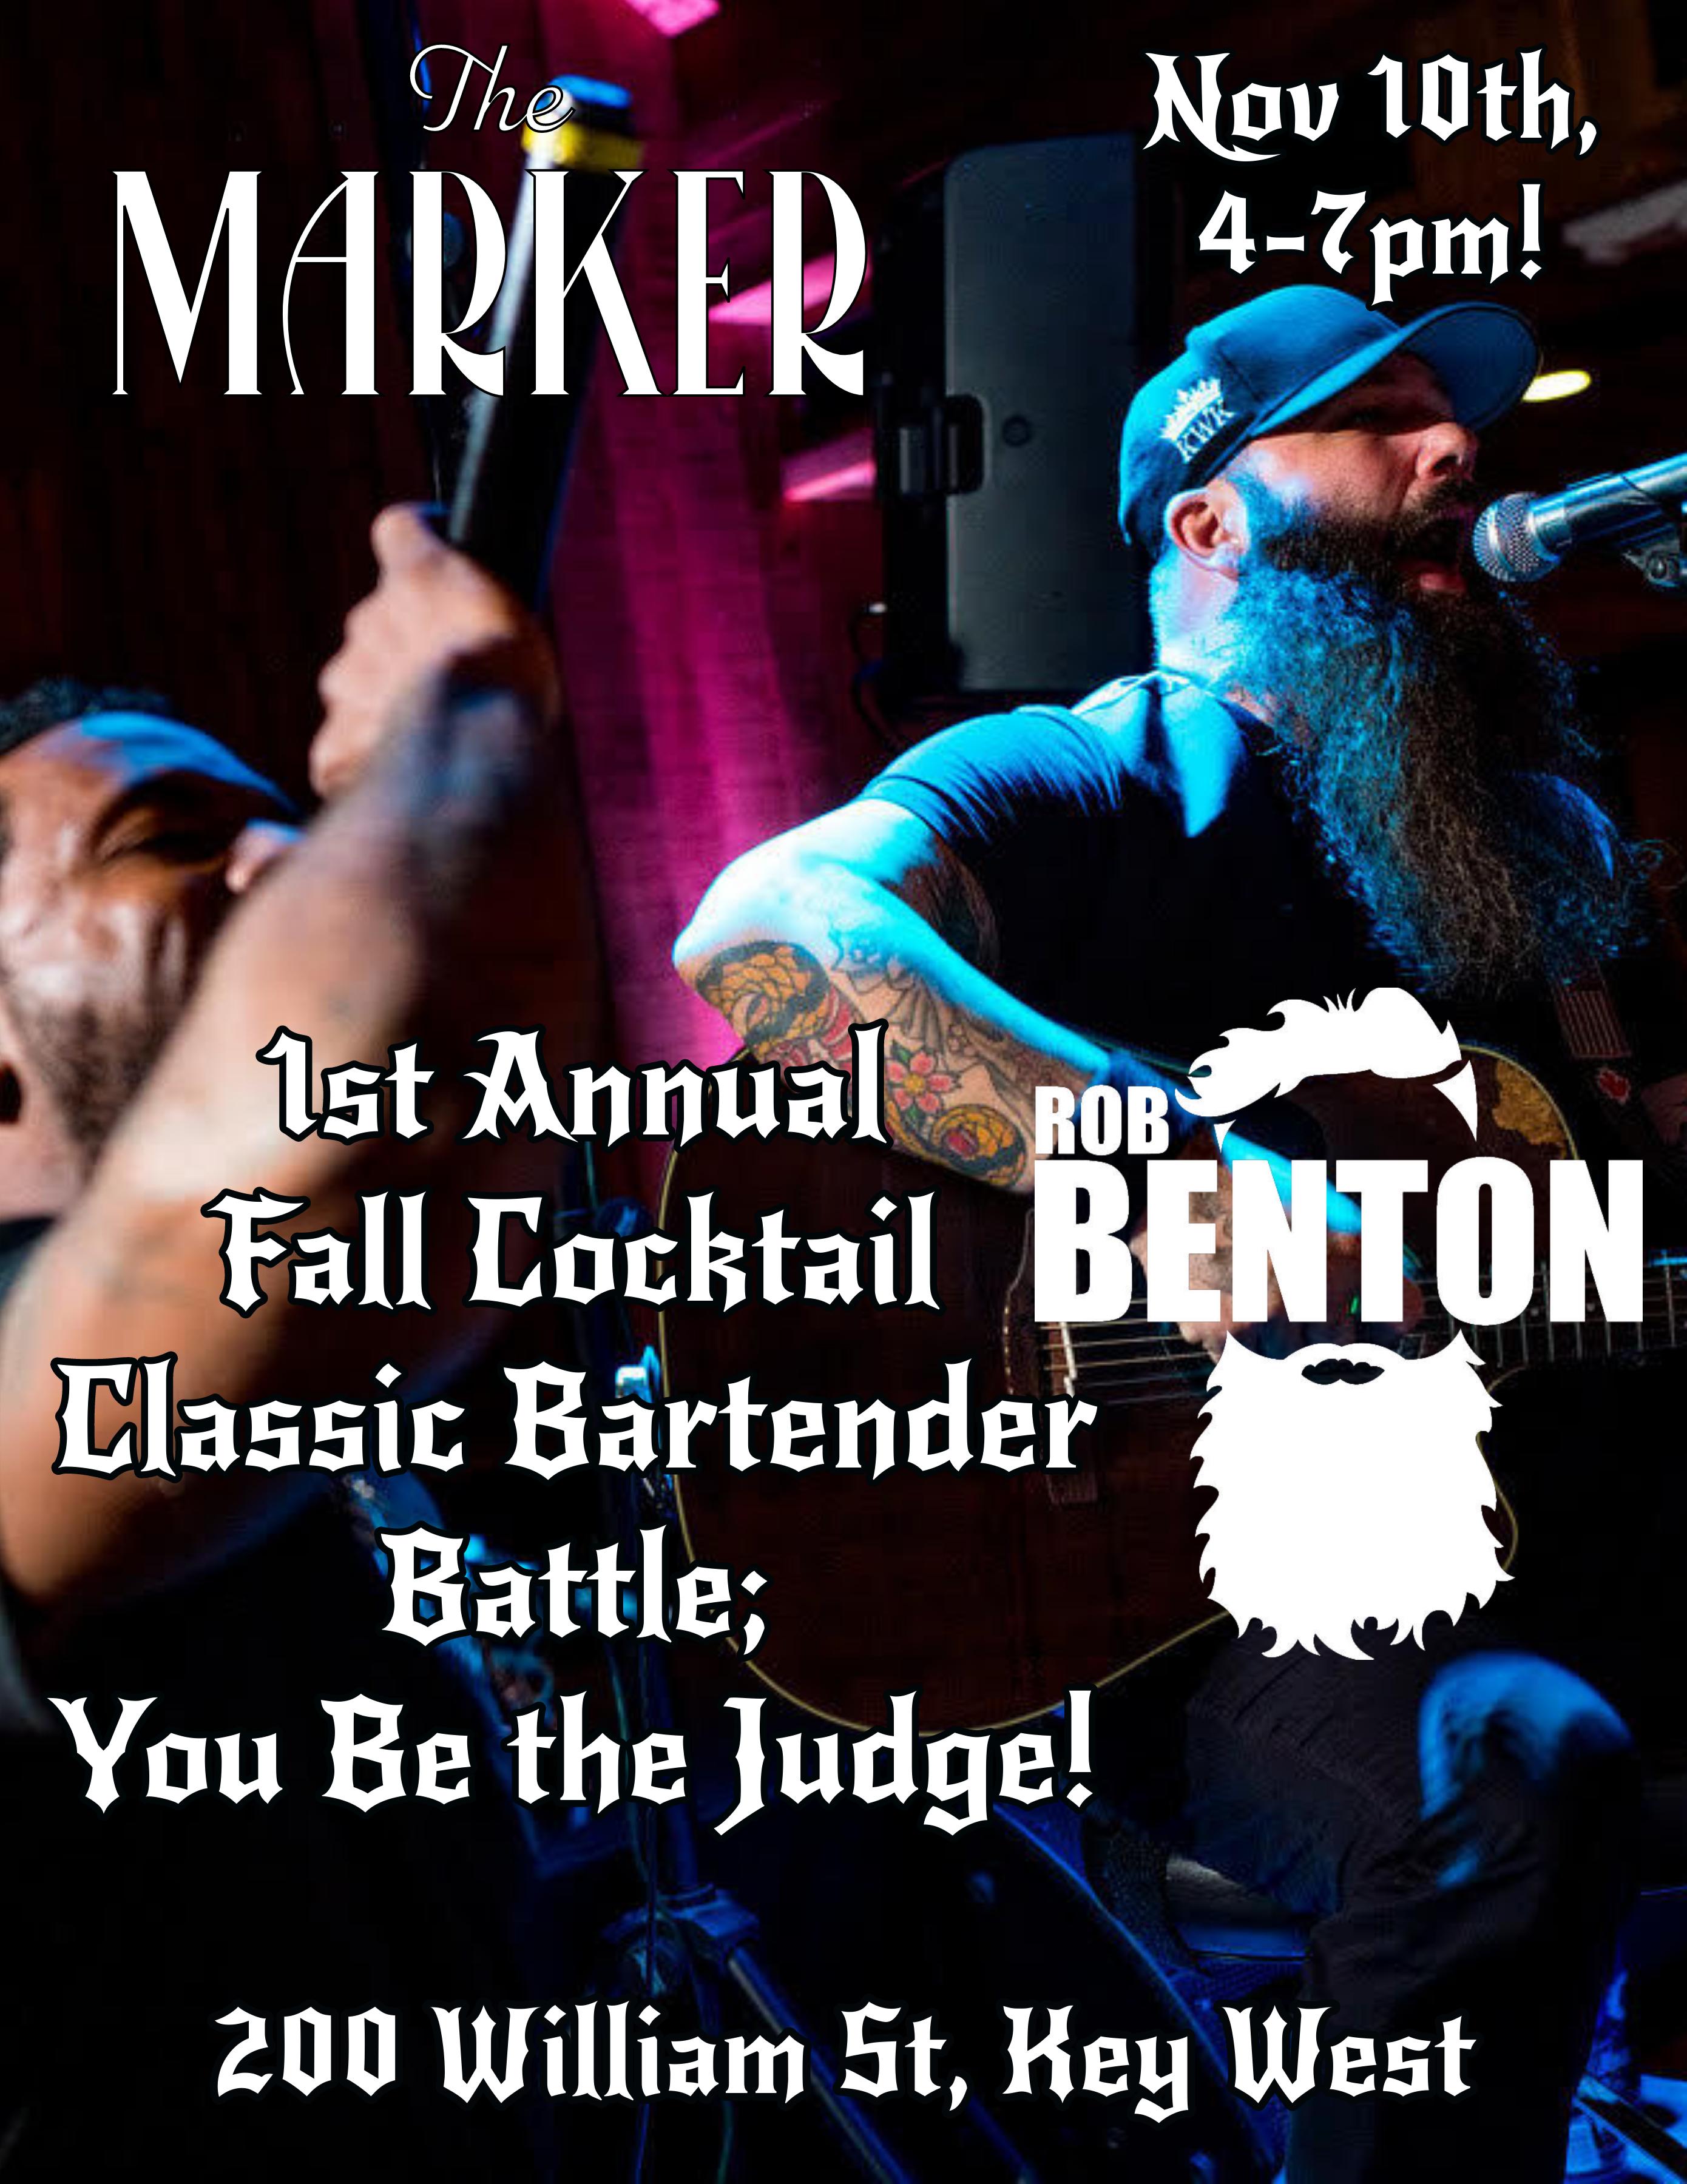 Rob Benton Live & First Annual Fall Cocktail Classic at The Marker